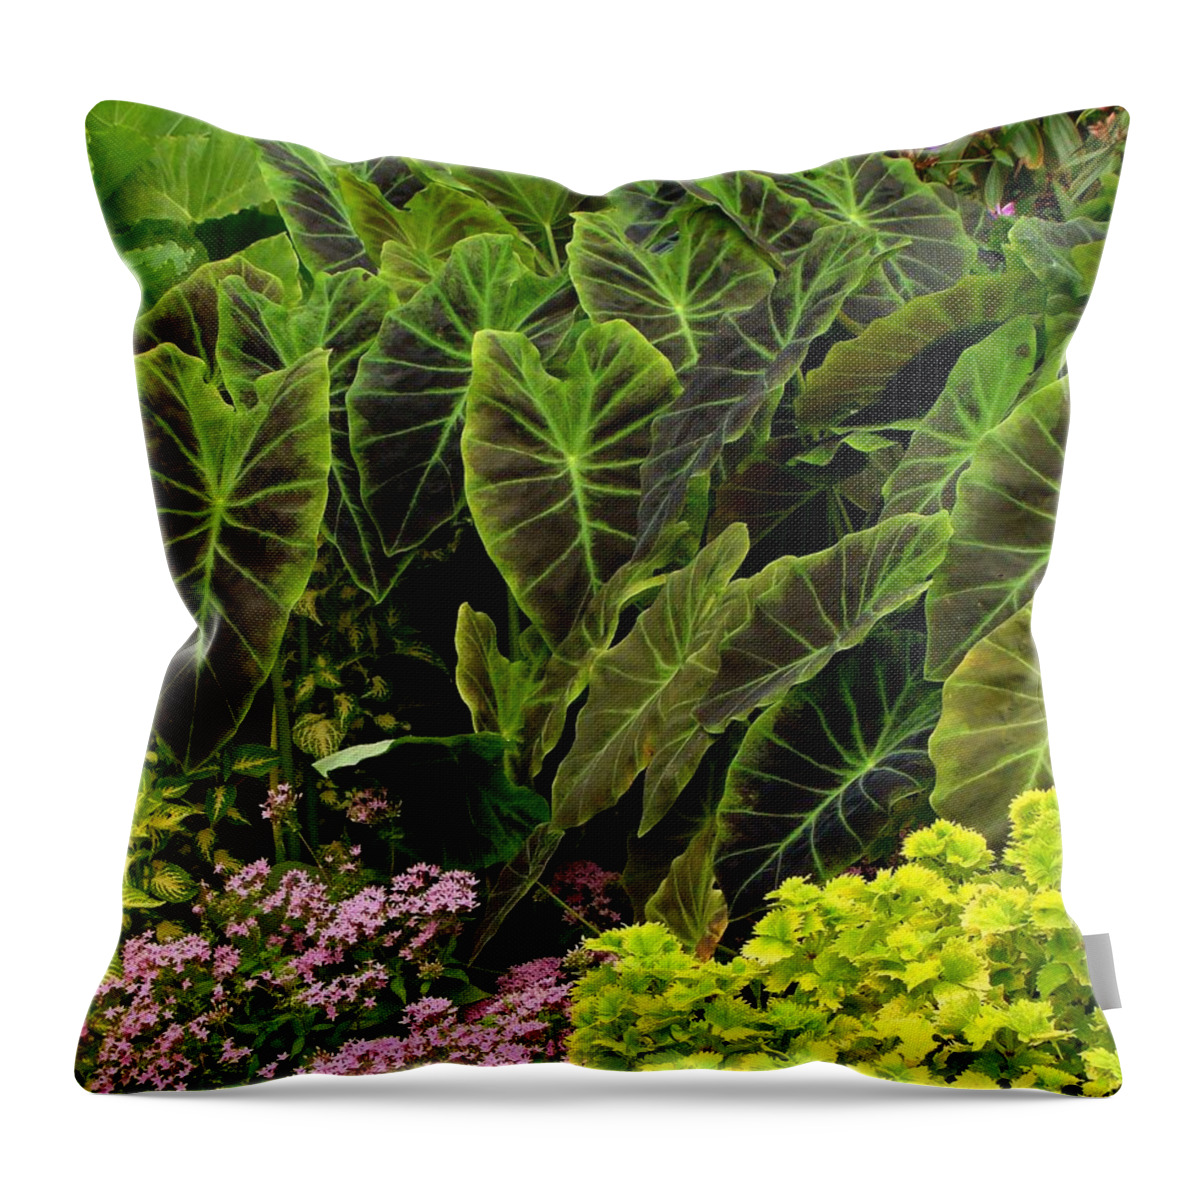 Fine Art Throw Pillow featuring the photograph Garden Salad by Rodney Lee Williams